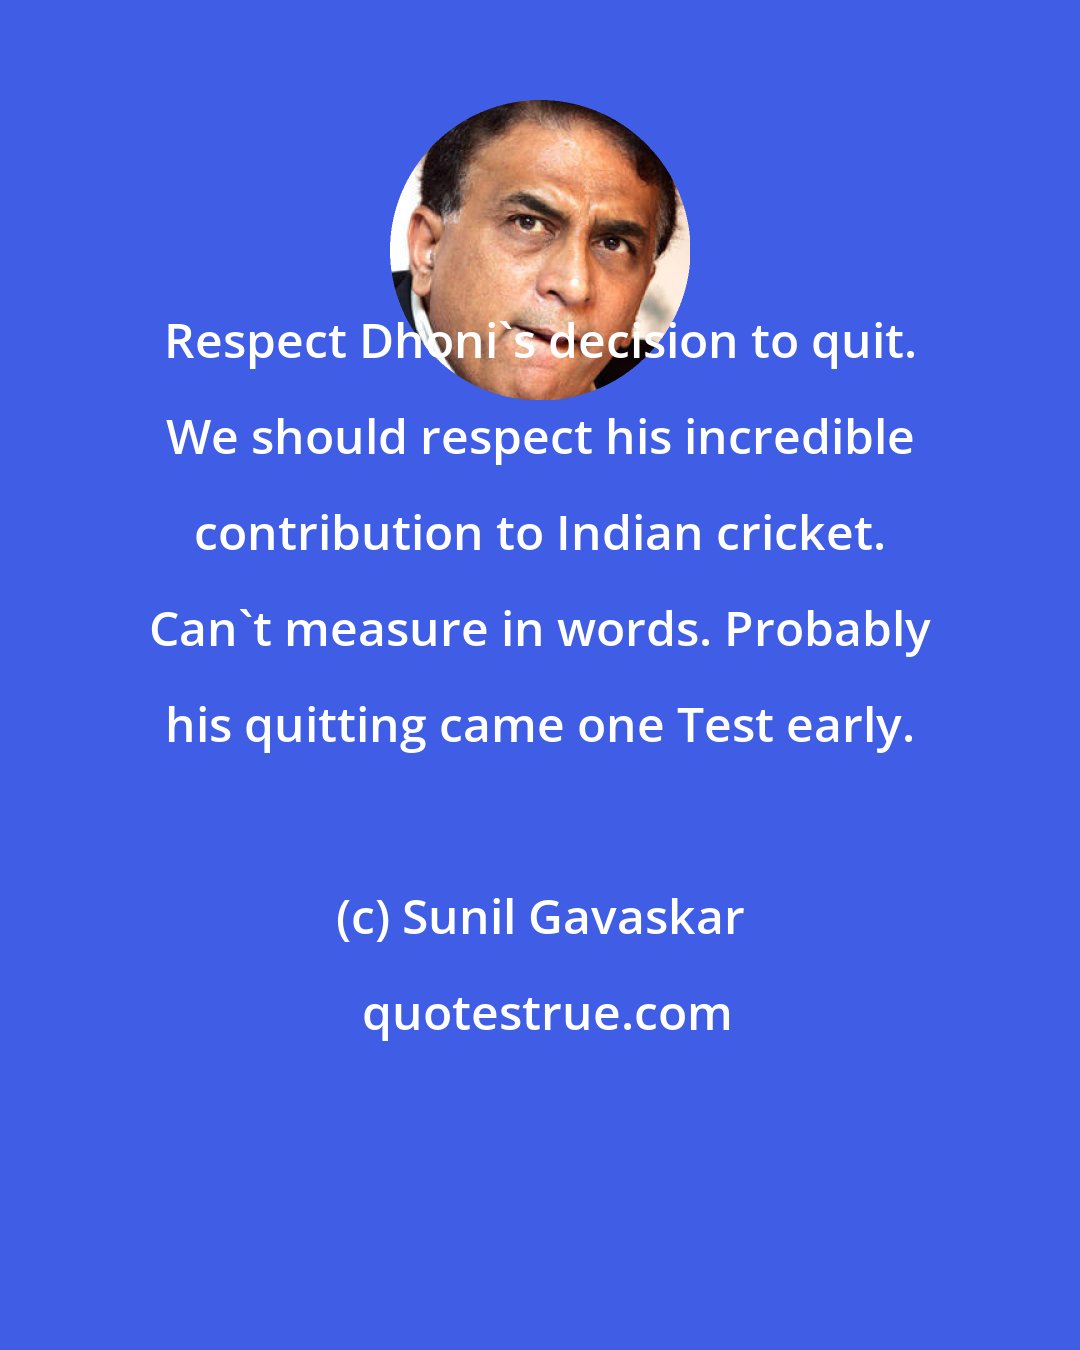 Sunil Gavaskar: Respect Dhoni's decision to quit. We should respect his incredible contribution to Indian cricket. Can't measure in words. Probably his quitting came one Test early.